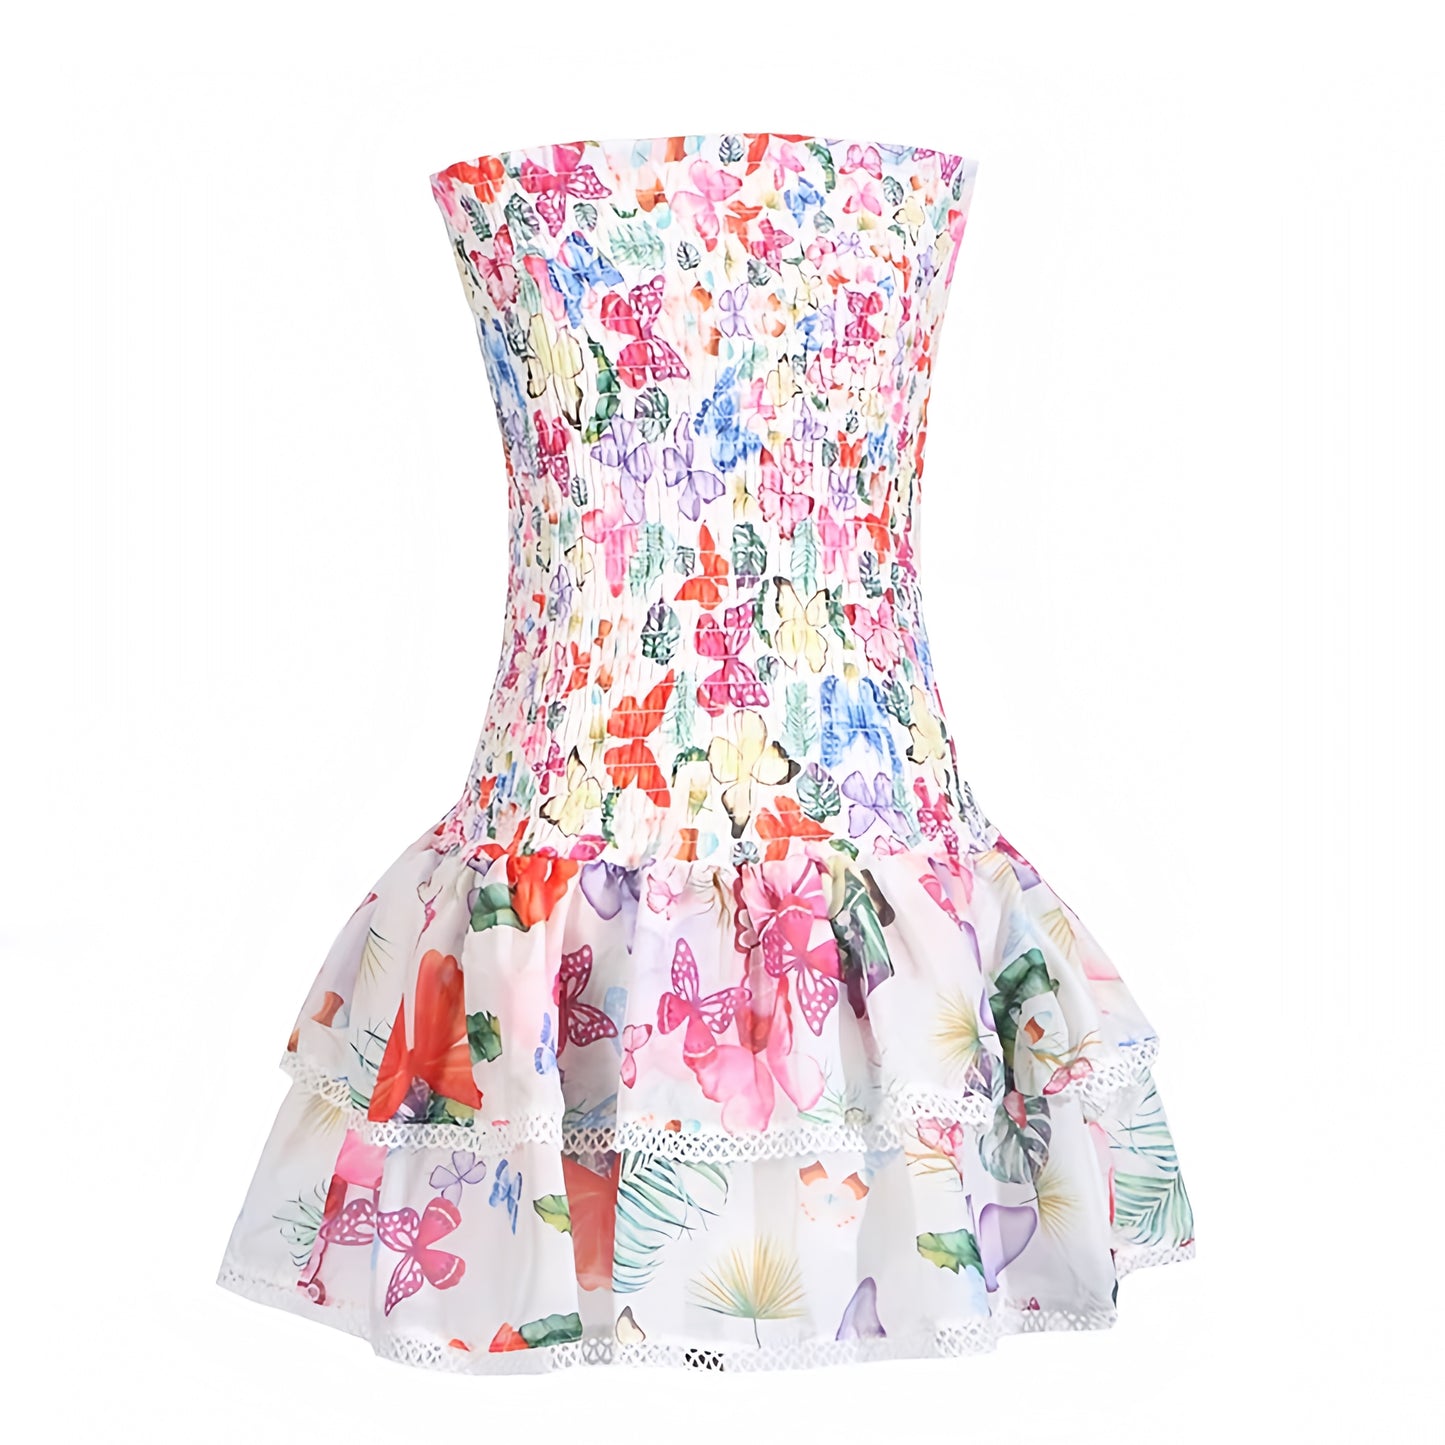 floral-print-white-rainbow-red-blue-pink-green-multi-color-butterfly-patterned-slim-bodycon-embroidered-layered-ruffle-trim-smocked-shirred-bodice-drop-waist-fit-and-flare-sweetheart-neckline-strapless-bandeau-sleeveless-spaghetti-strap-halter-tiered-flowy-boho-bohemian-short-mini-dress-couture-women-ladies-teens-tweens-chic-trendy-spring-2024-summer-elegant-semi-formal-casual-feminine-preppy-style-prom-homecoming-party-tropical-european-sundress-charo-ruiz-zimmerman-altard-state-loveshackfancy-dupe